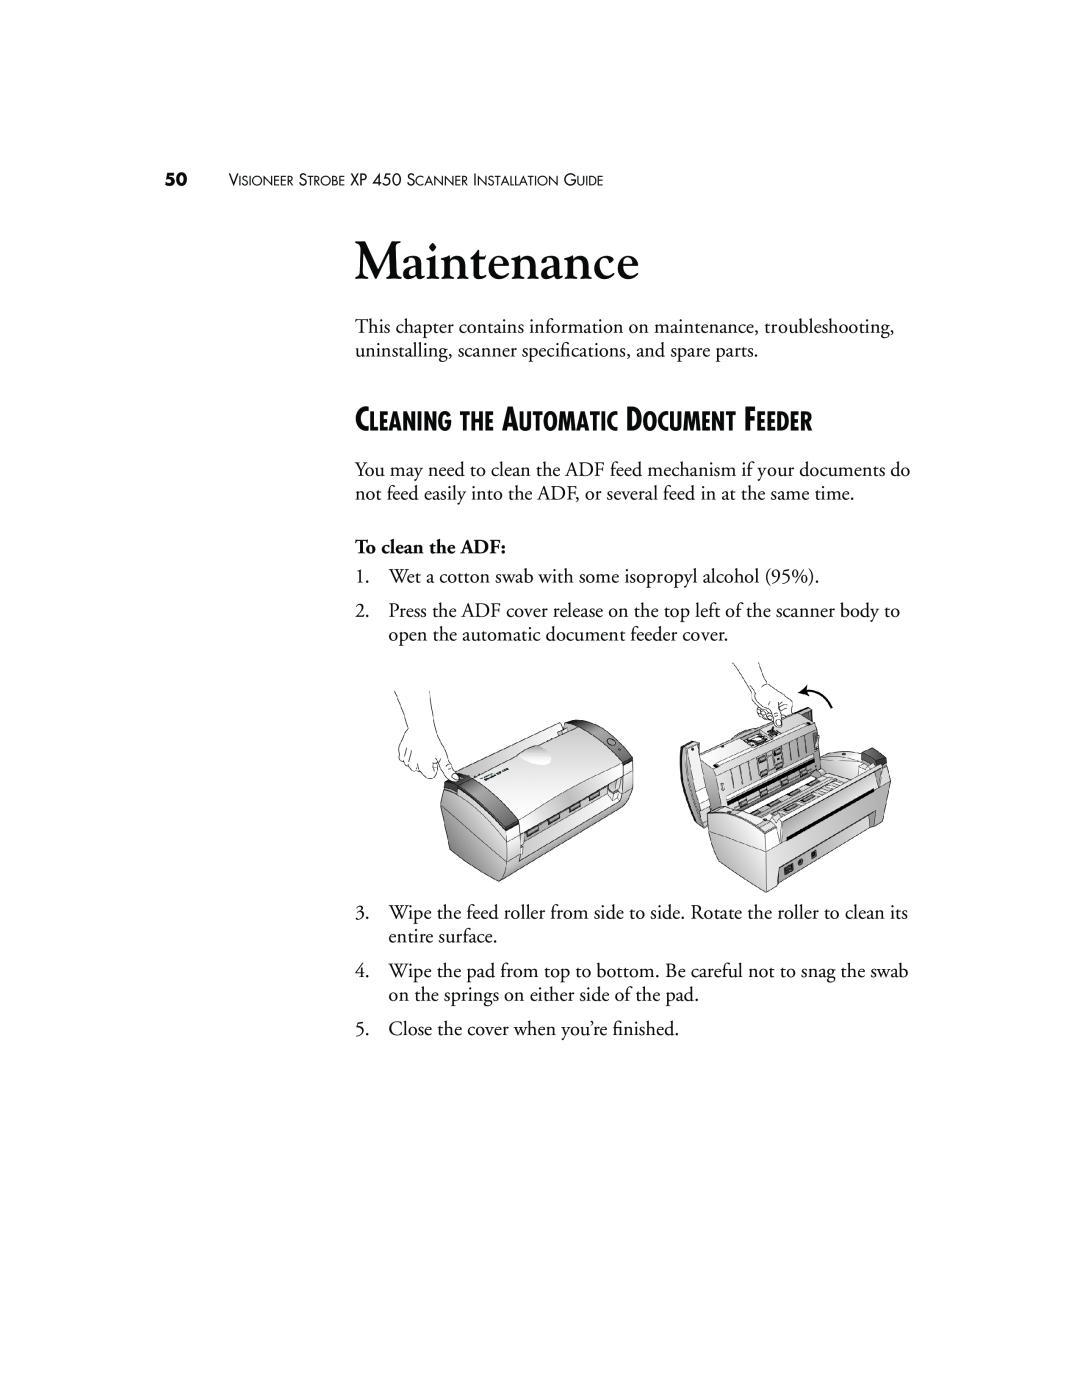 Visioneer XP 450 manual Maintenance, Cleaning The Automatic Document Feeder 